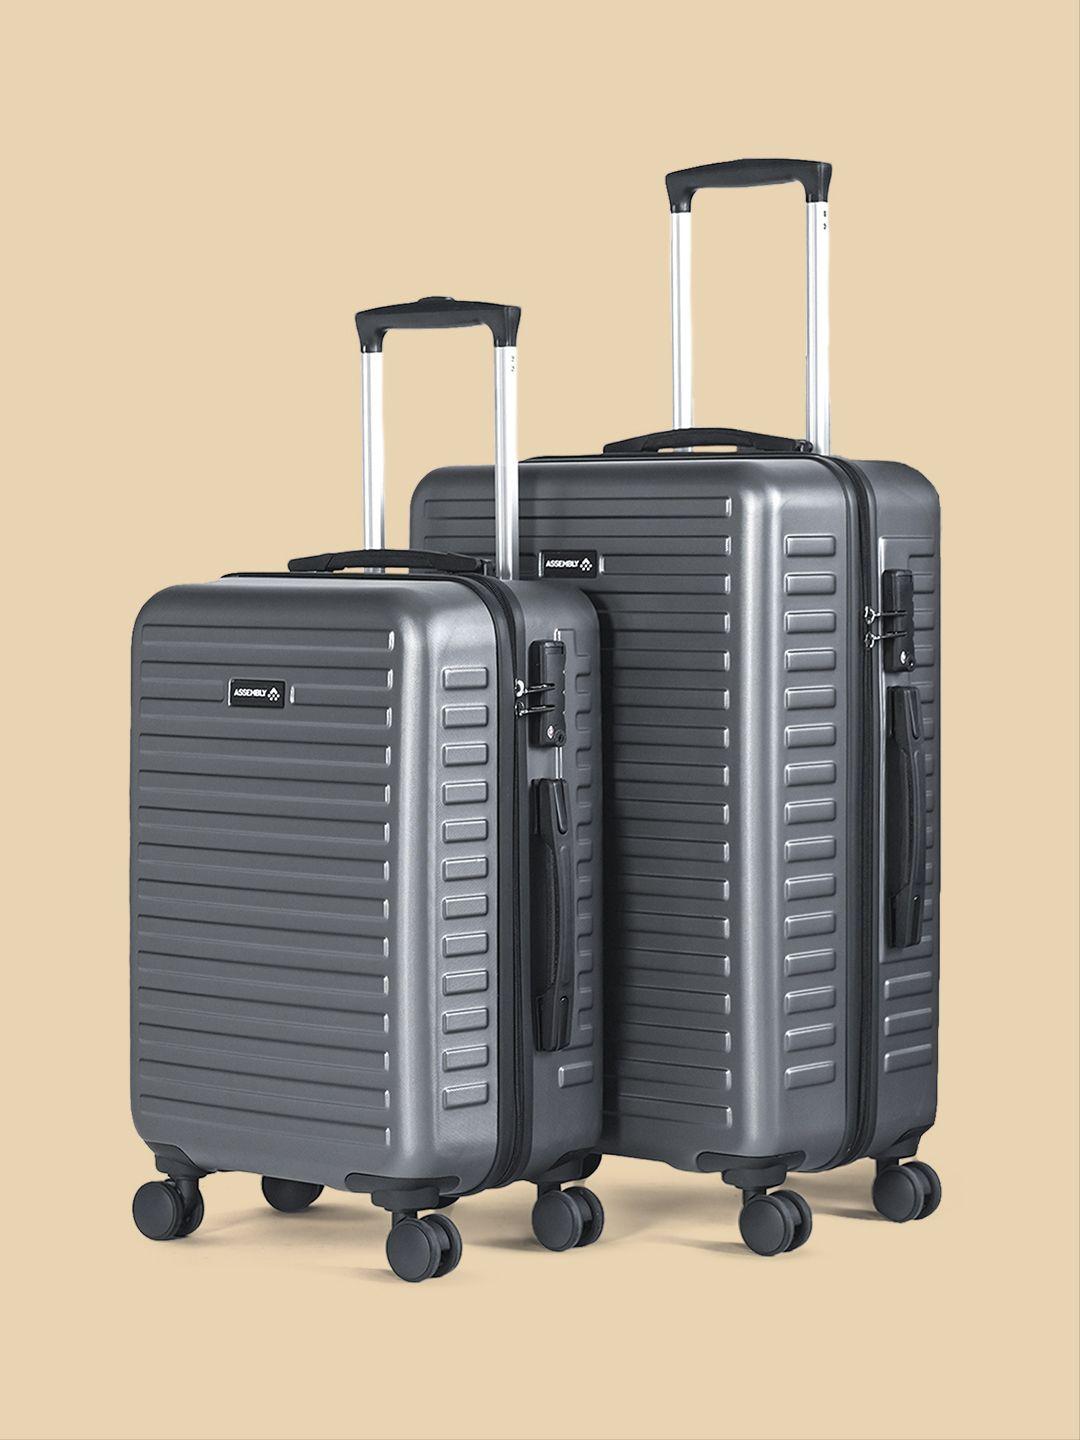 assembly set of 2 textured hard cabin-sized medium-sized trolley bags 40l 60l